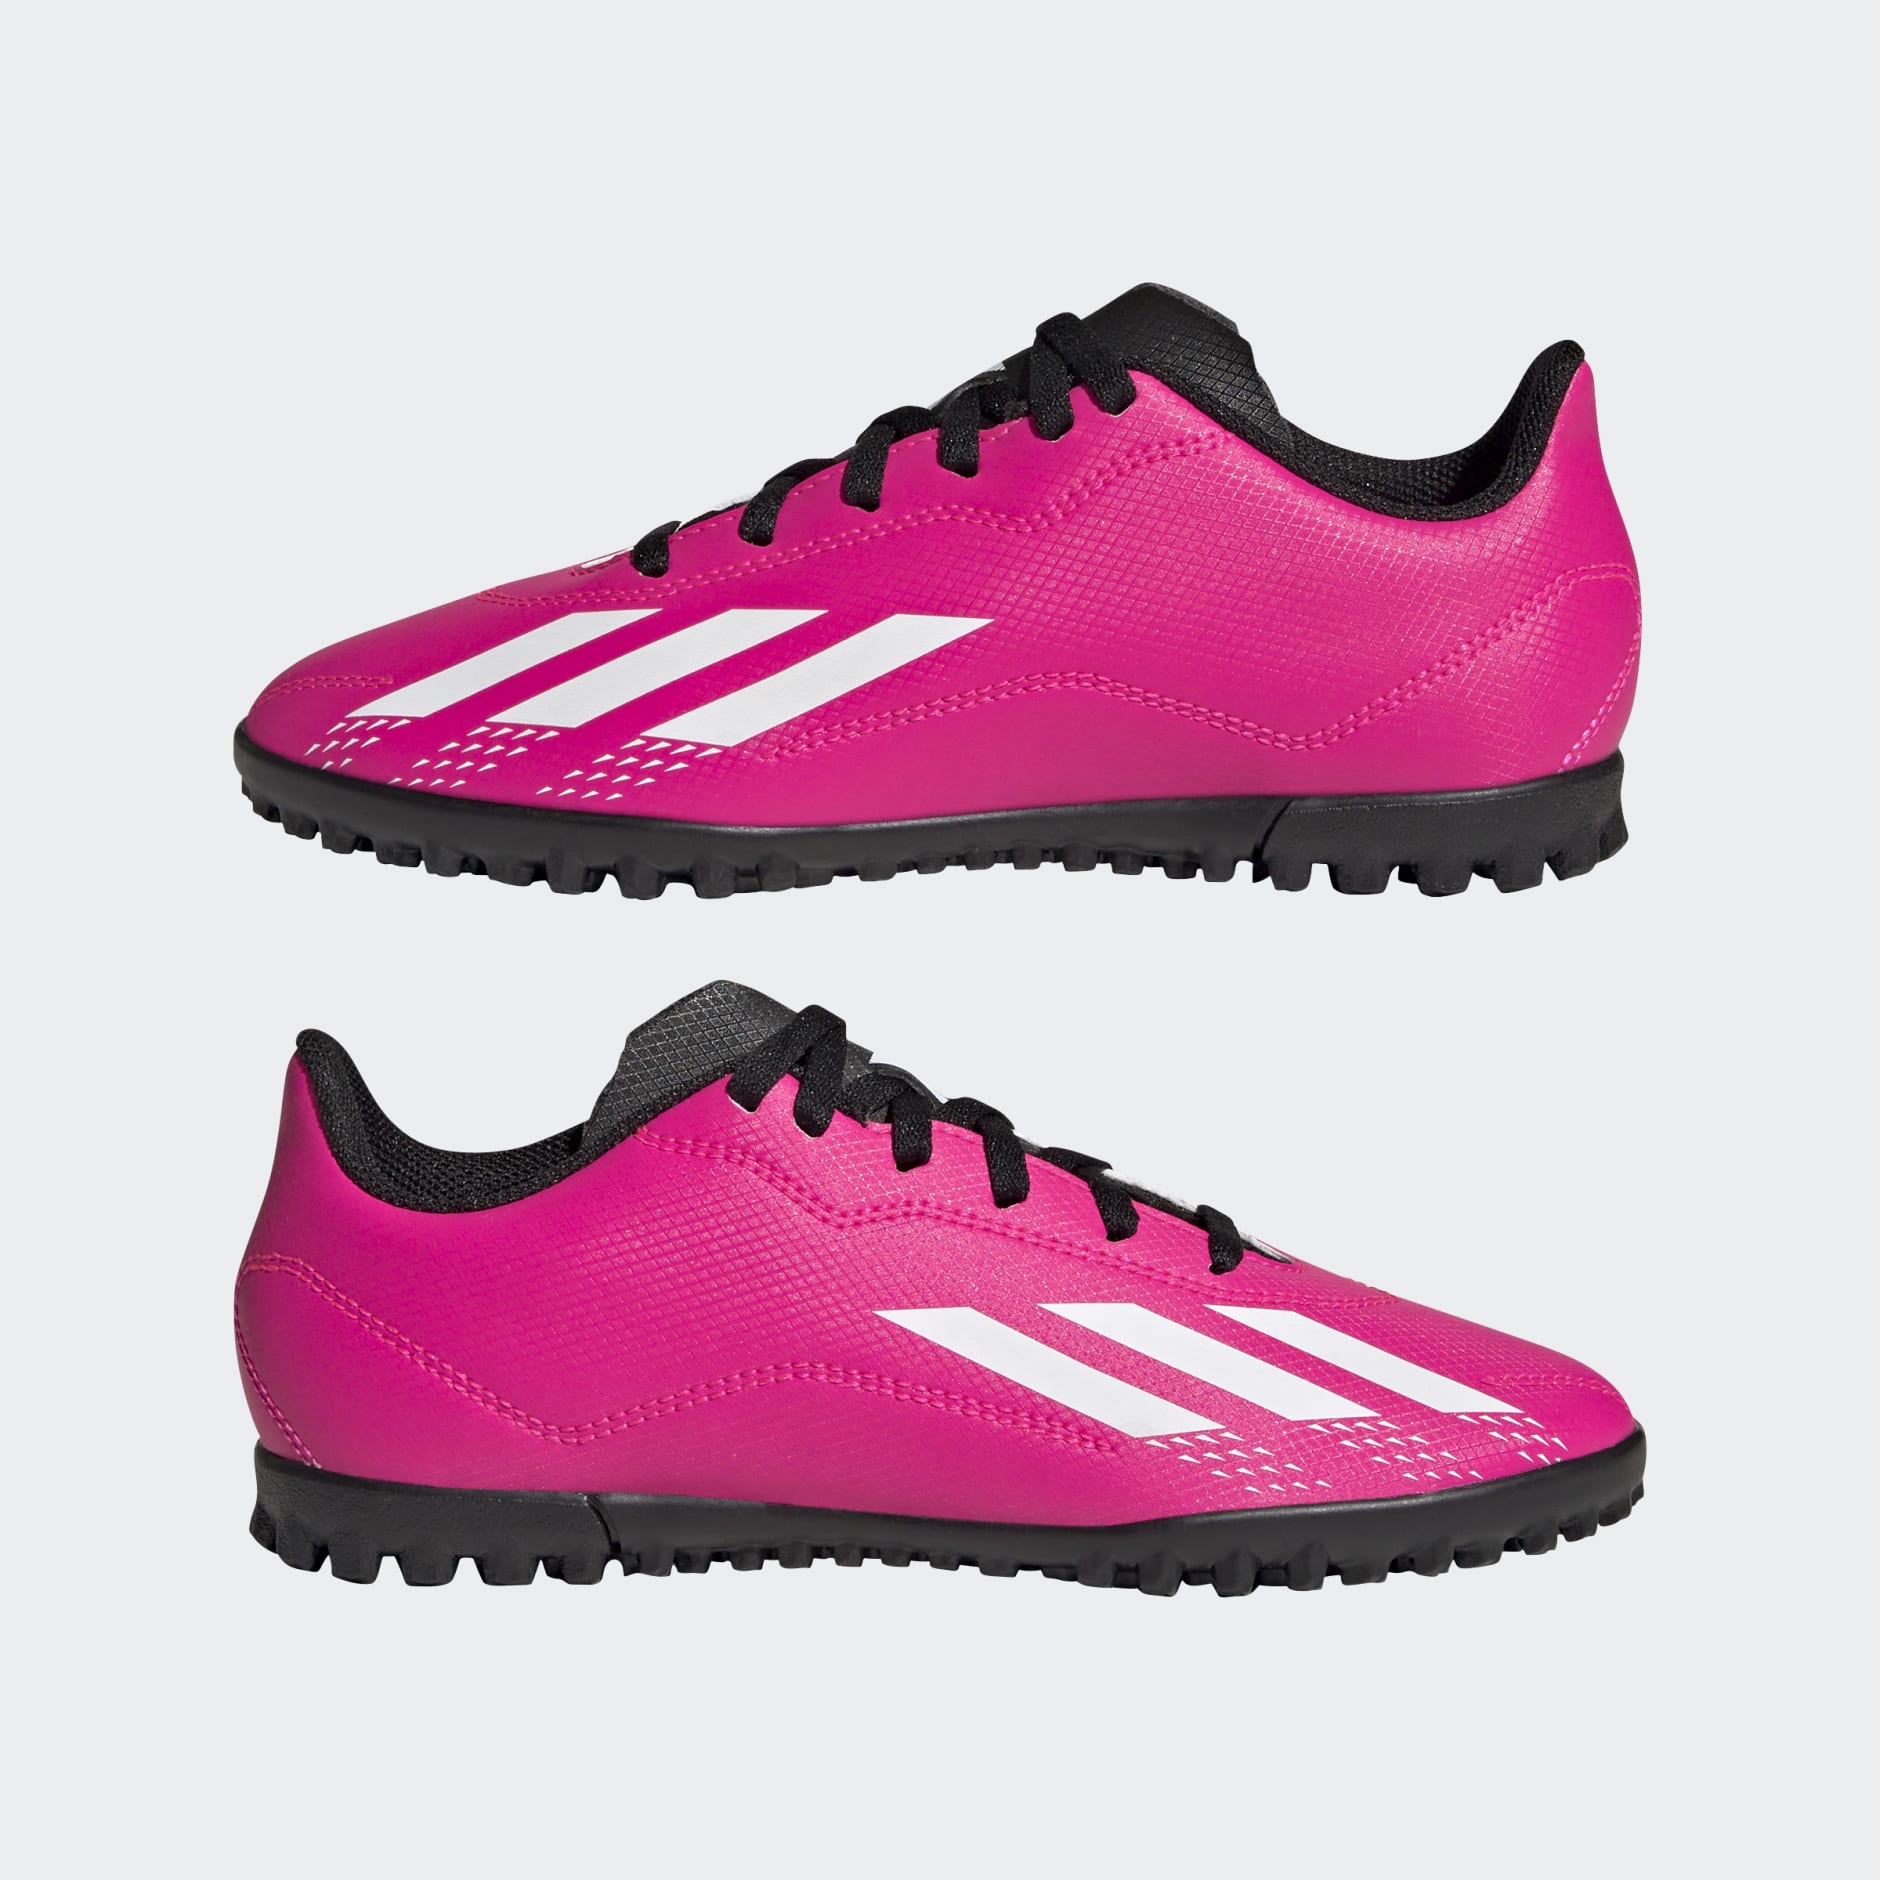 Shoes - X Speedportal.4 Turf Boots - Pink | adidas South Africa